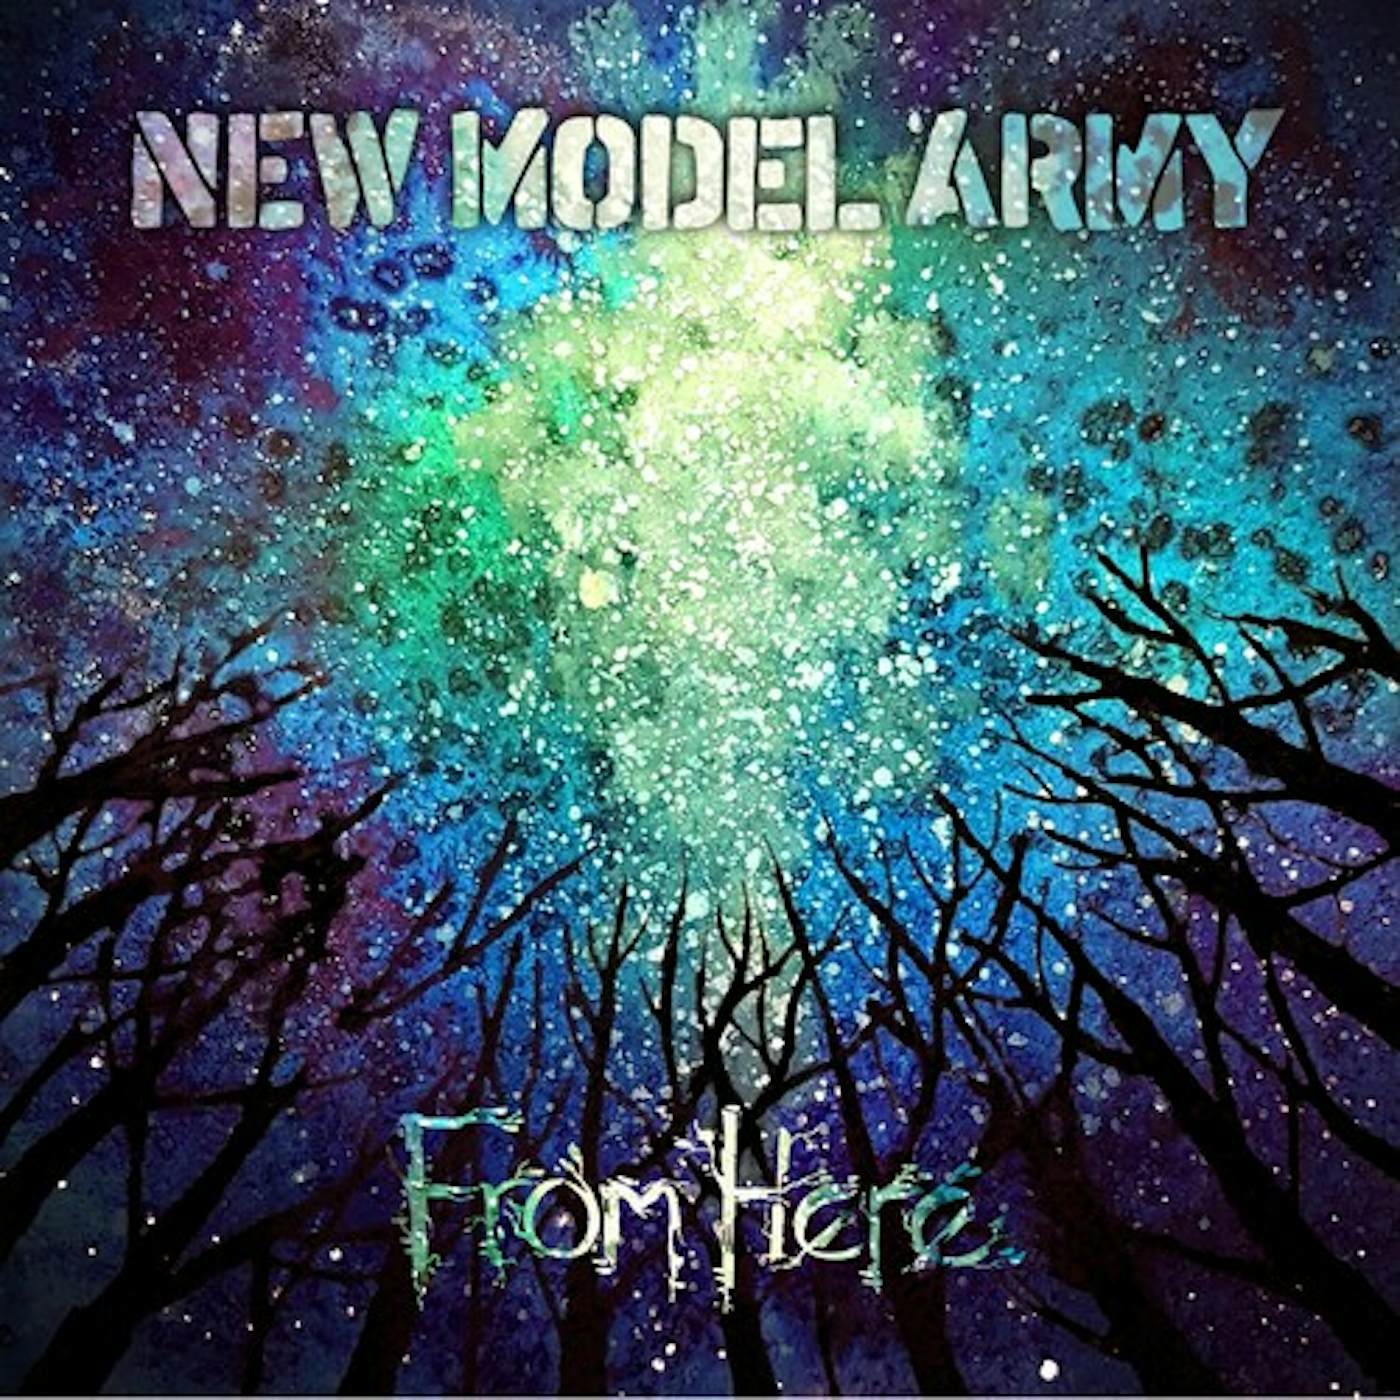 New Model Army From Here Vinyl Record